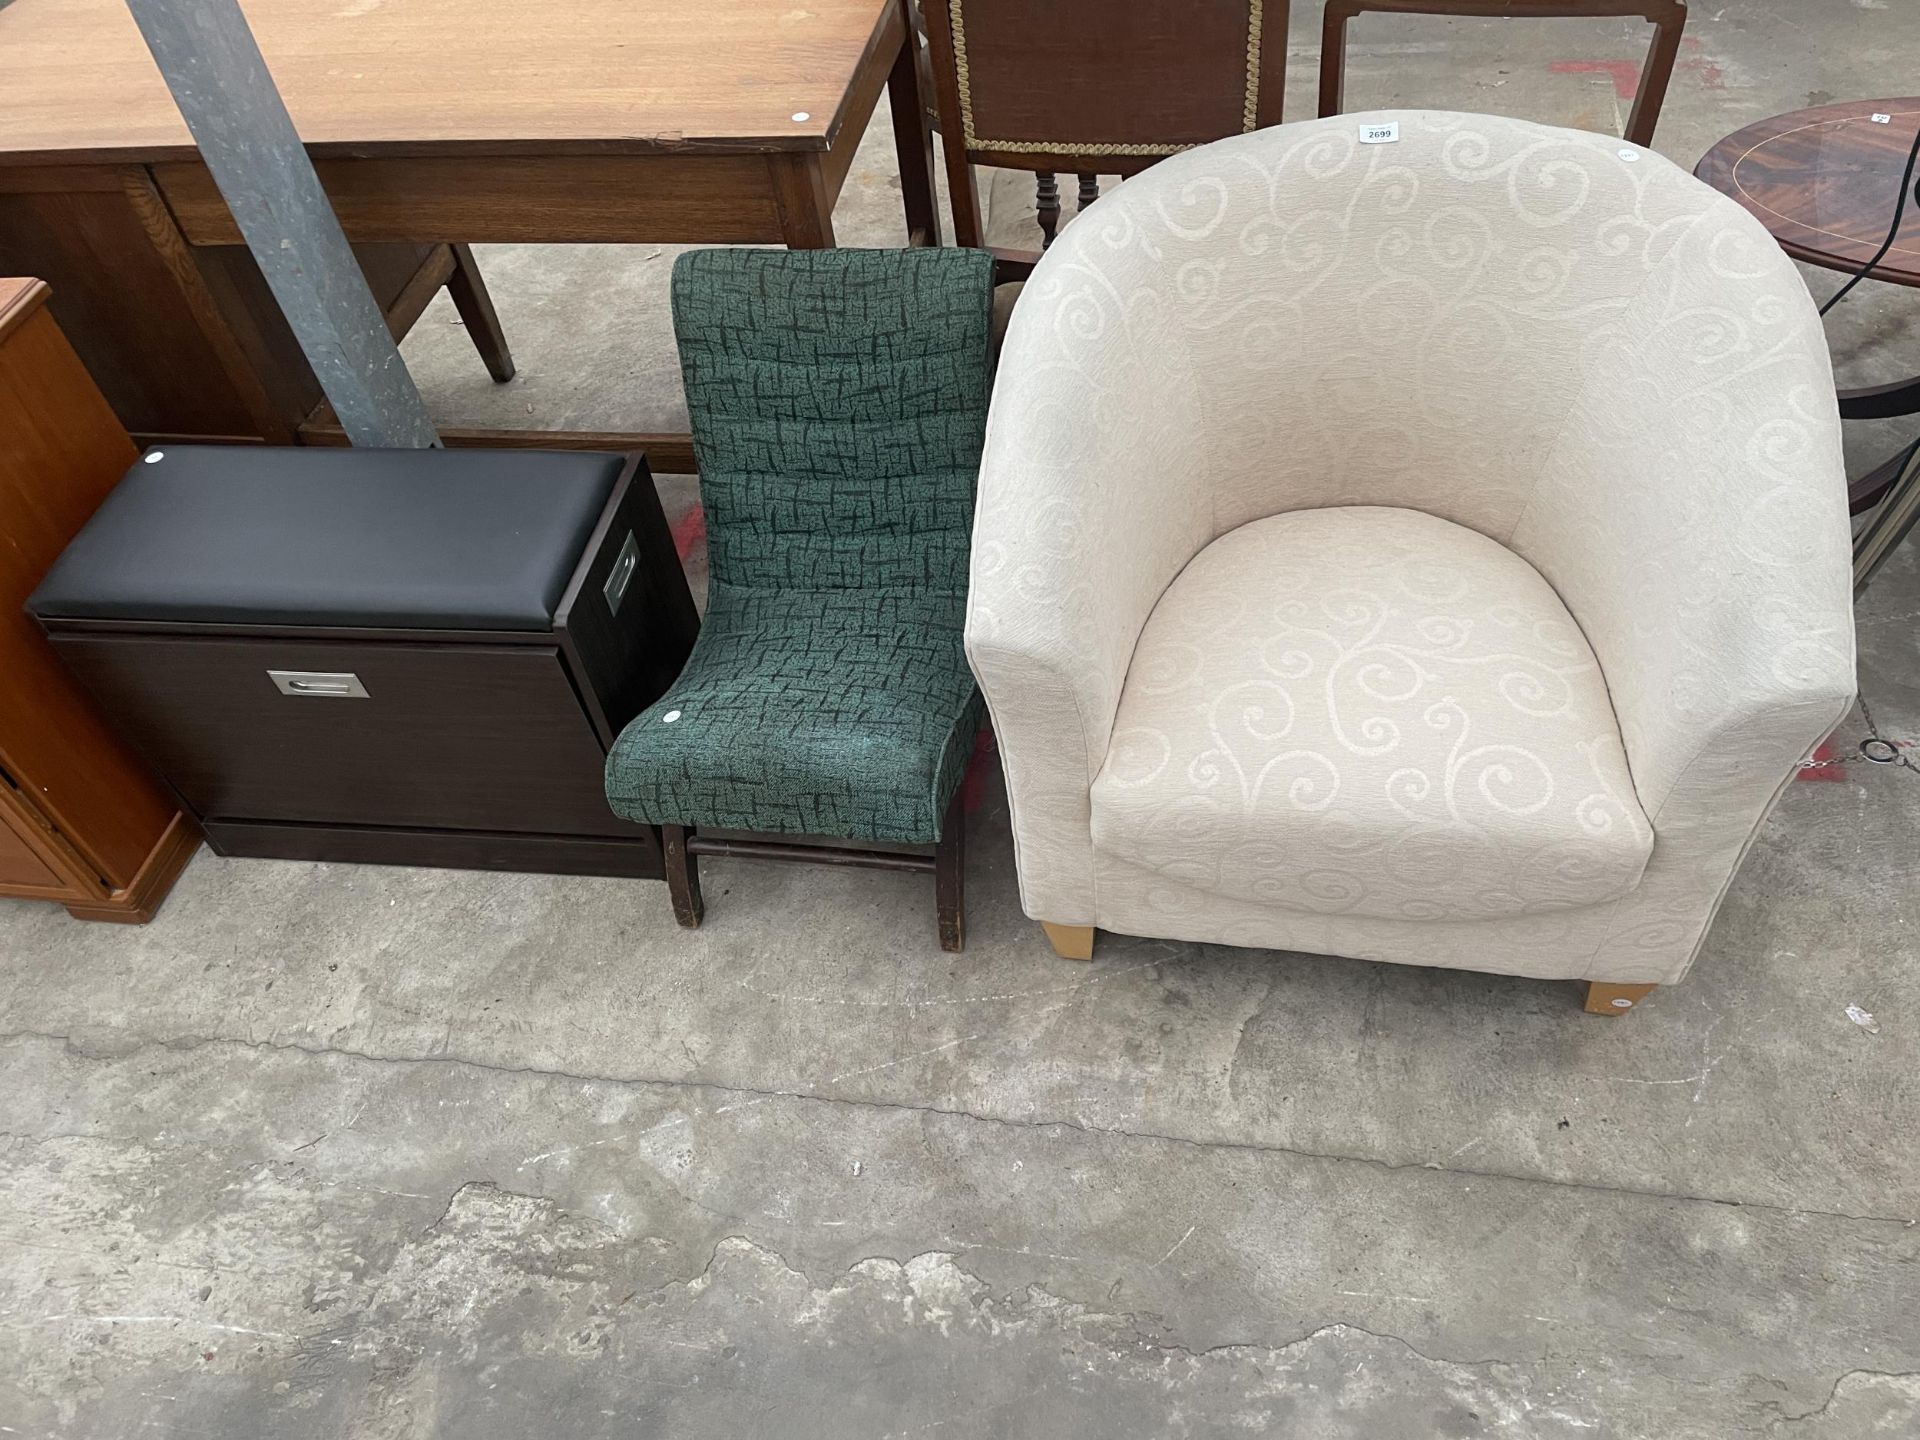 A MODERN TUB CHAIR, BEDROOM CHAIR AND BOX STOOL / SHOE RACK